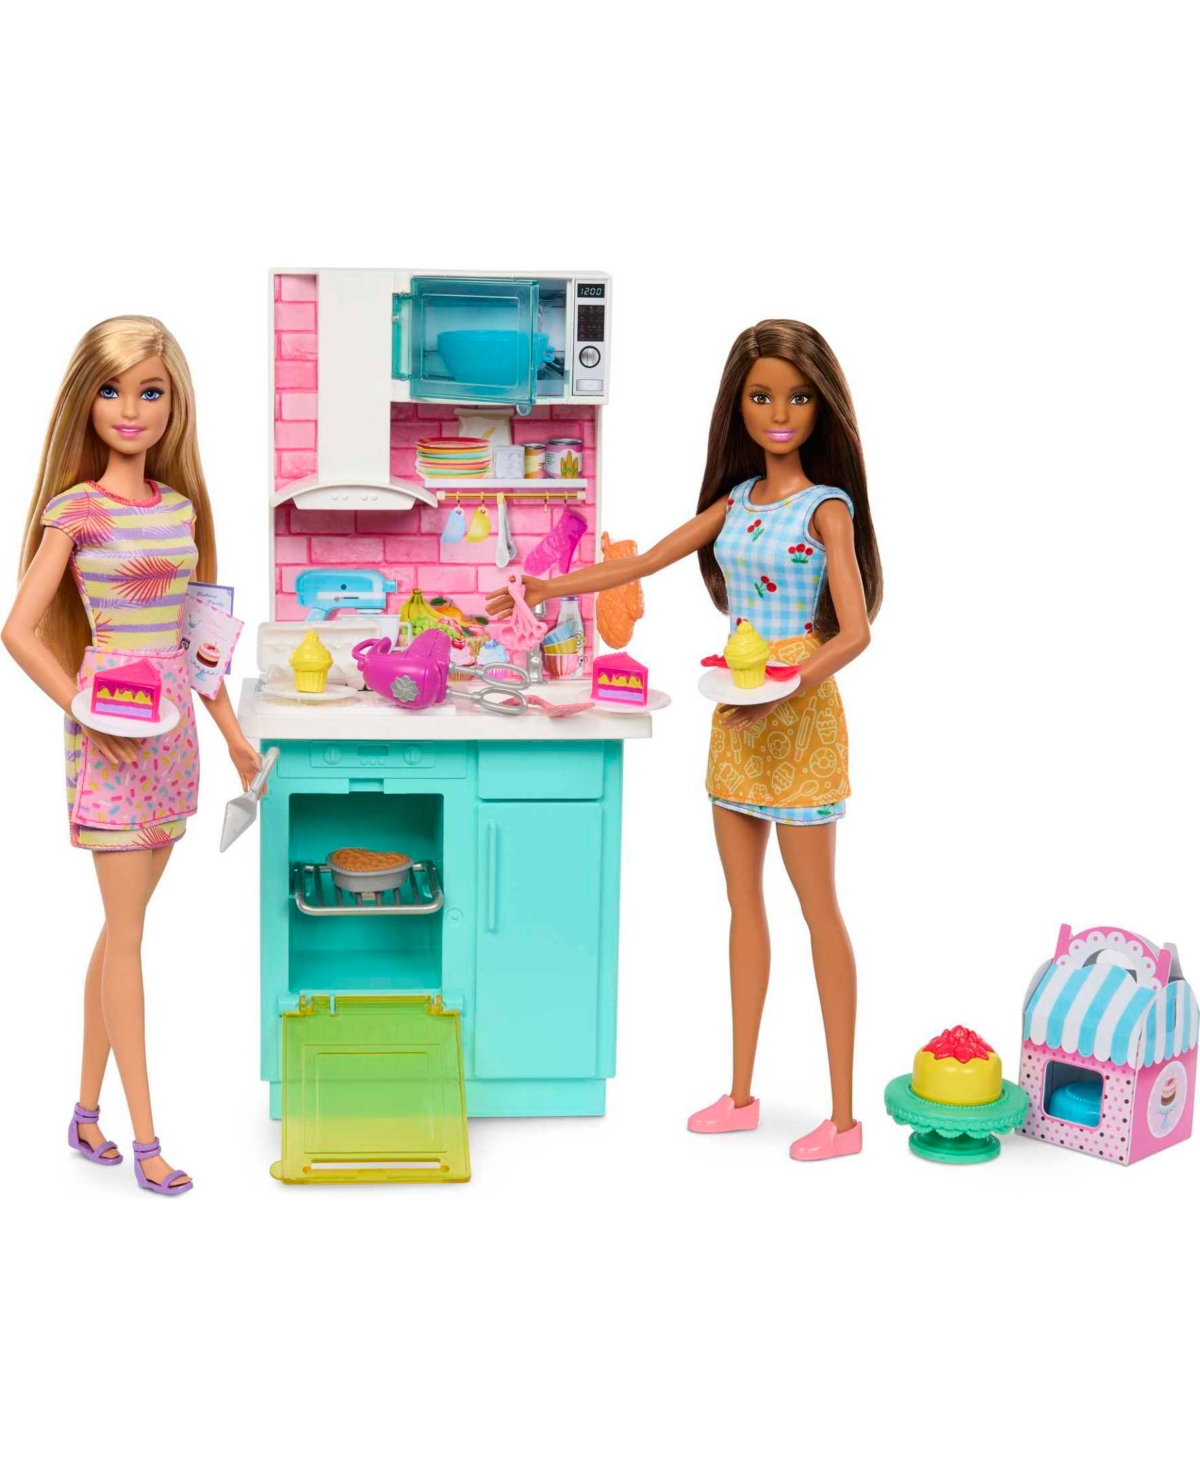 Barbie Kids' Celebration Fun Dolls And Accessories, Baking Playset With 2 Dolls, Oven 15 Plus Accessories In Multicolor